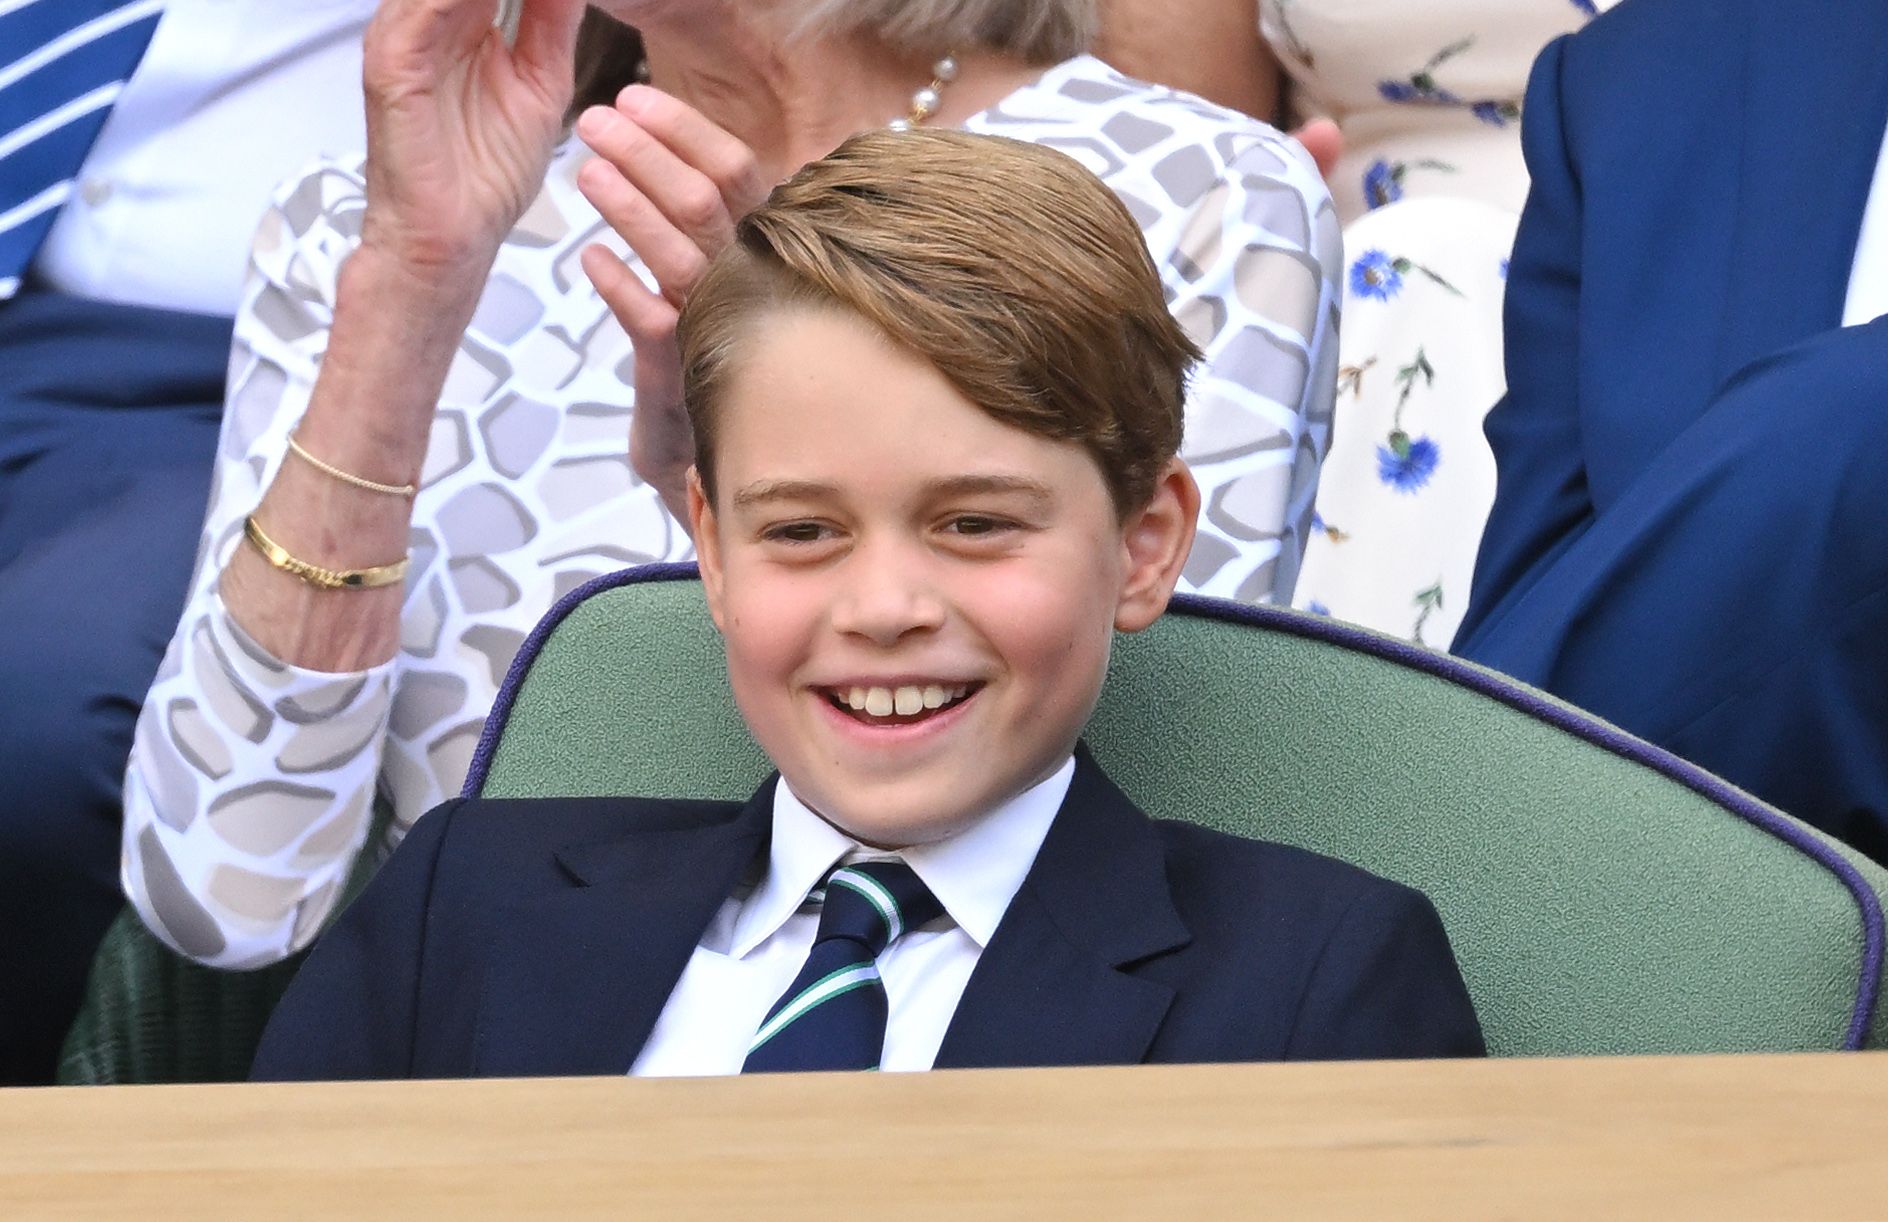 Watch Adorable Video of Prince George as He Holds Wimbledon Trophy